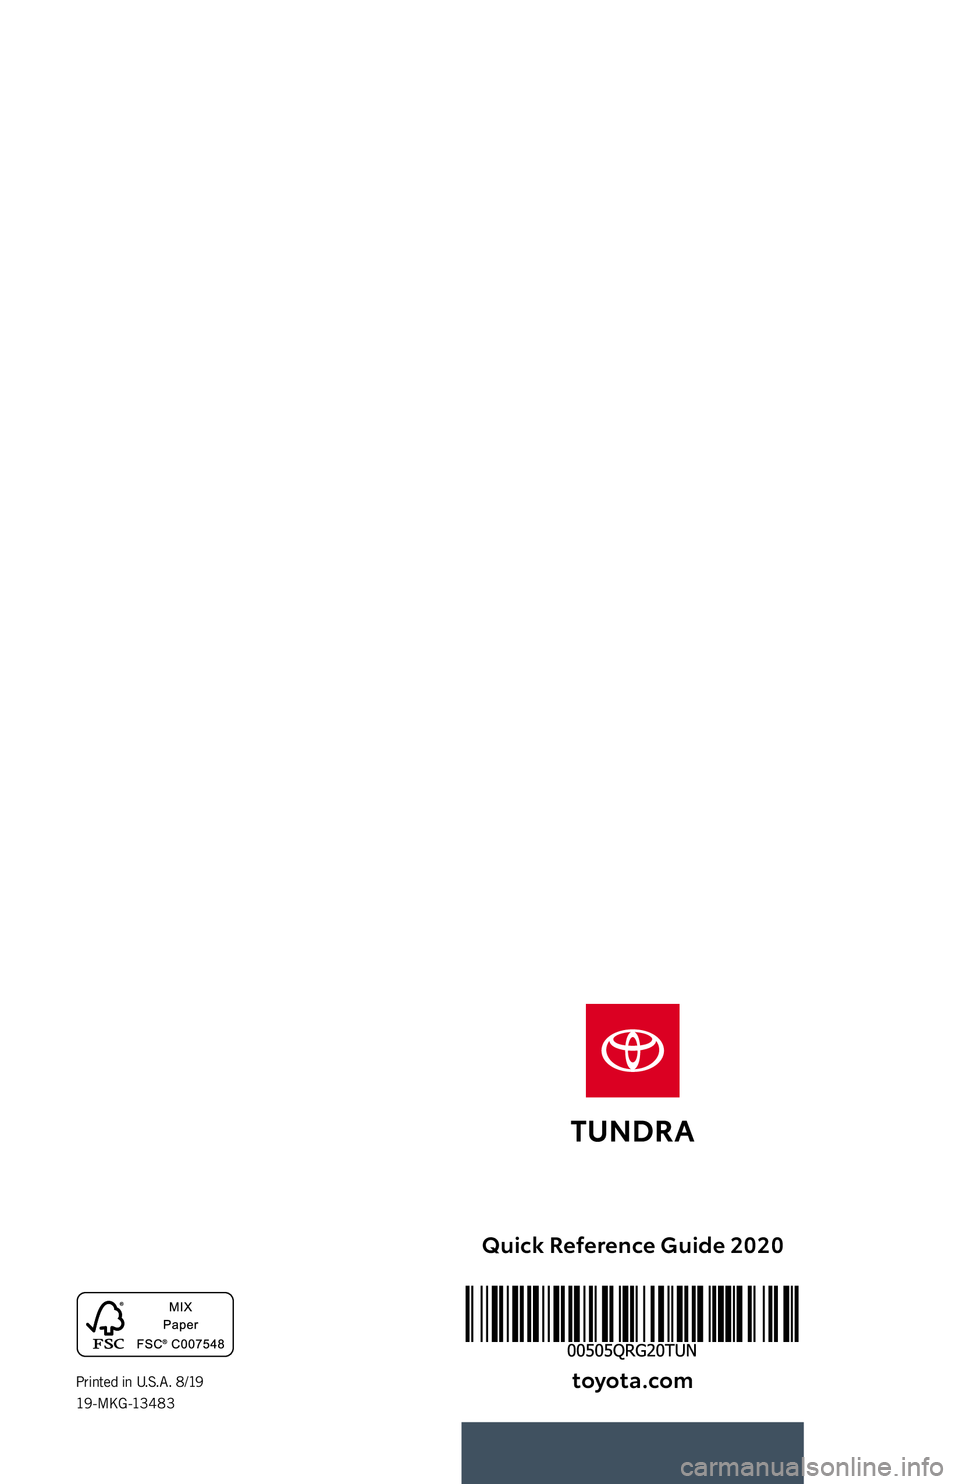 TOYOTA TUNDRA 2020   (in English) Workshop Manual Quick Reference Guide 2020
toyota.comPrinted in U.S.A. 8/19 19 - M KG -13 4 8 3 
62436_Cov_Tundra.indd   17/19/19   7:30 PM  